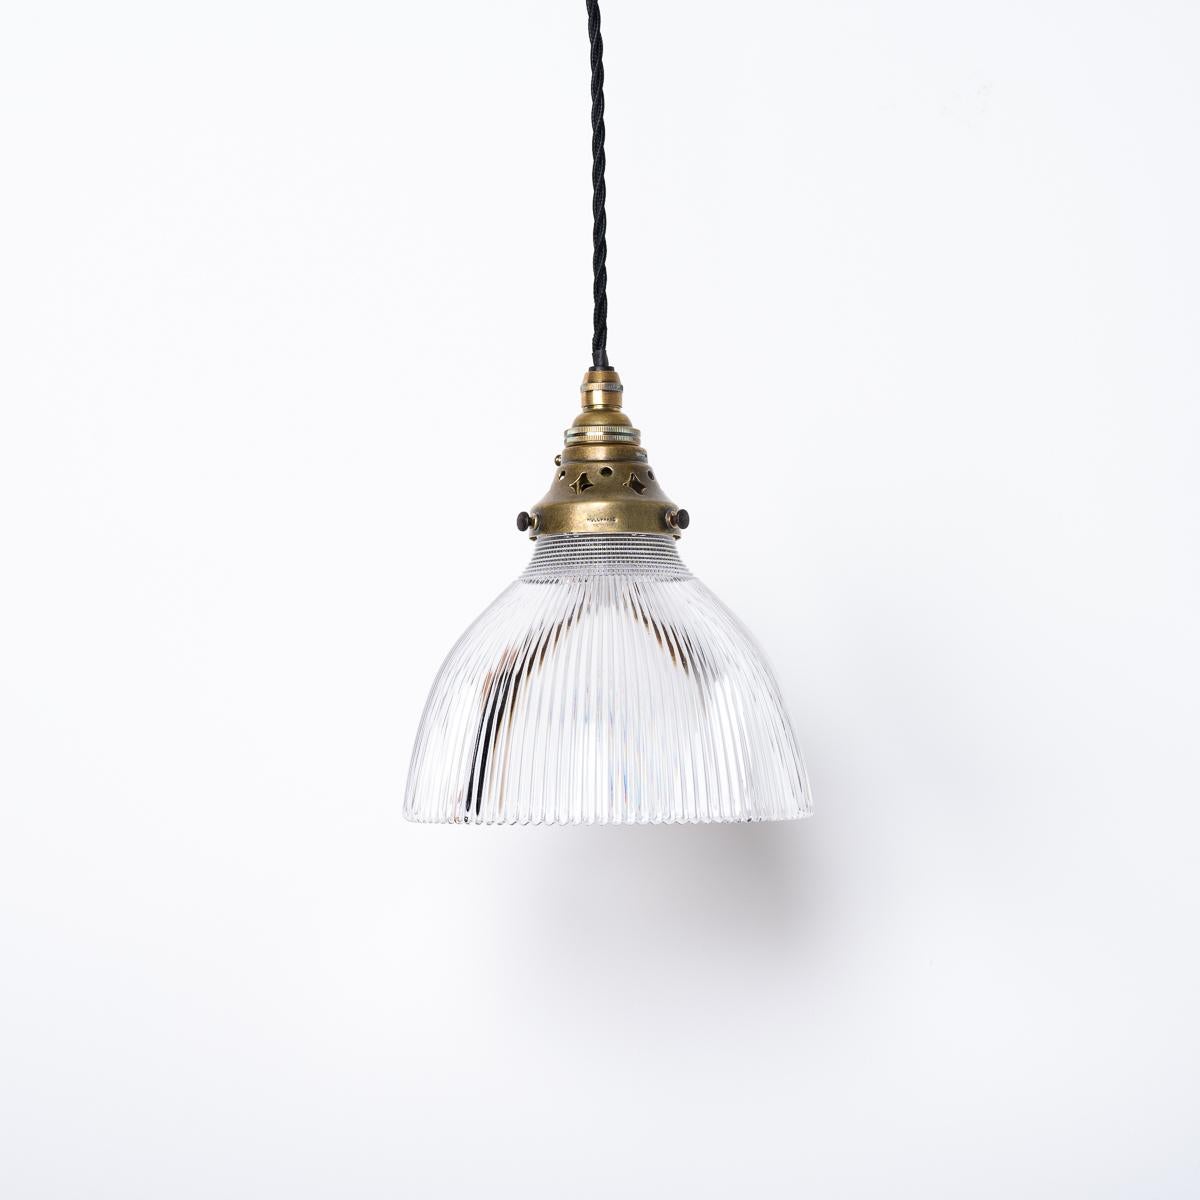 ANTIQUE HOLOPHANE  PRISMATIC GLASS PENDANT LIGHT


An attractive antique Holophane prismatic glass light with original adjustable aged brass fittings.

Stamped Holophane galleries and prismatic glass shades also bearing the Holophane makers marks